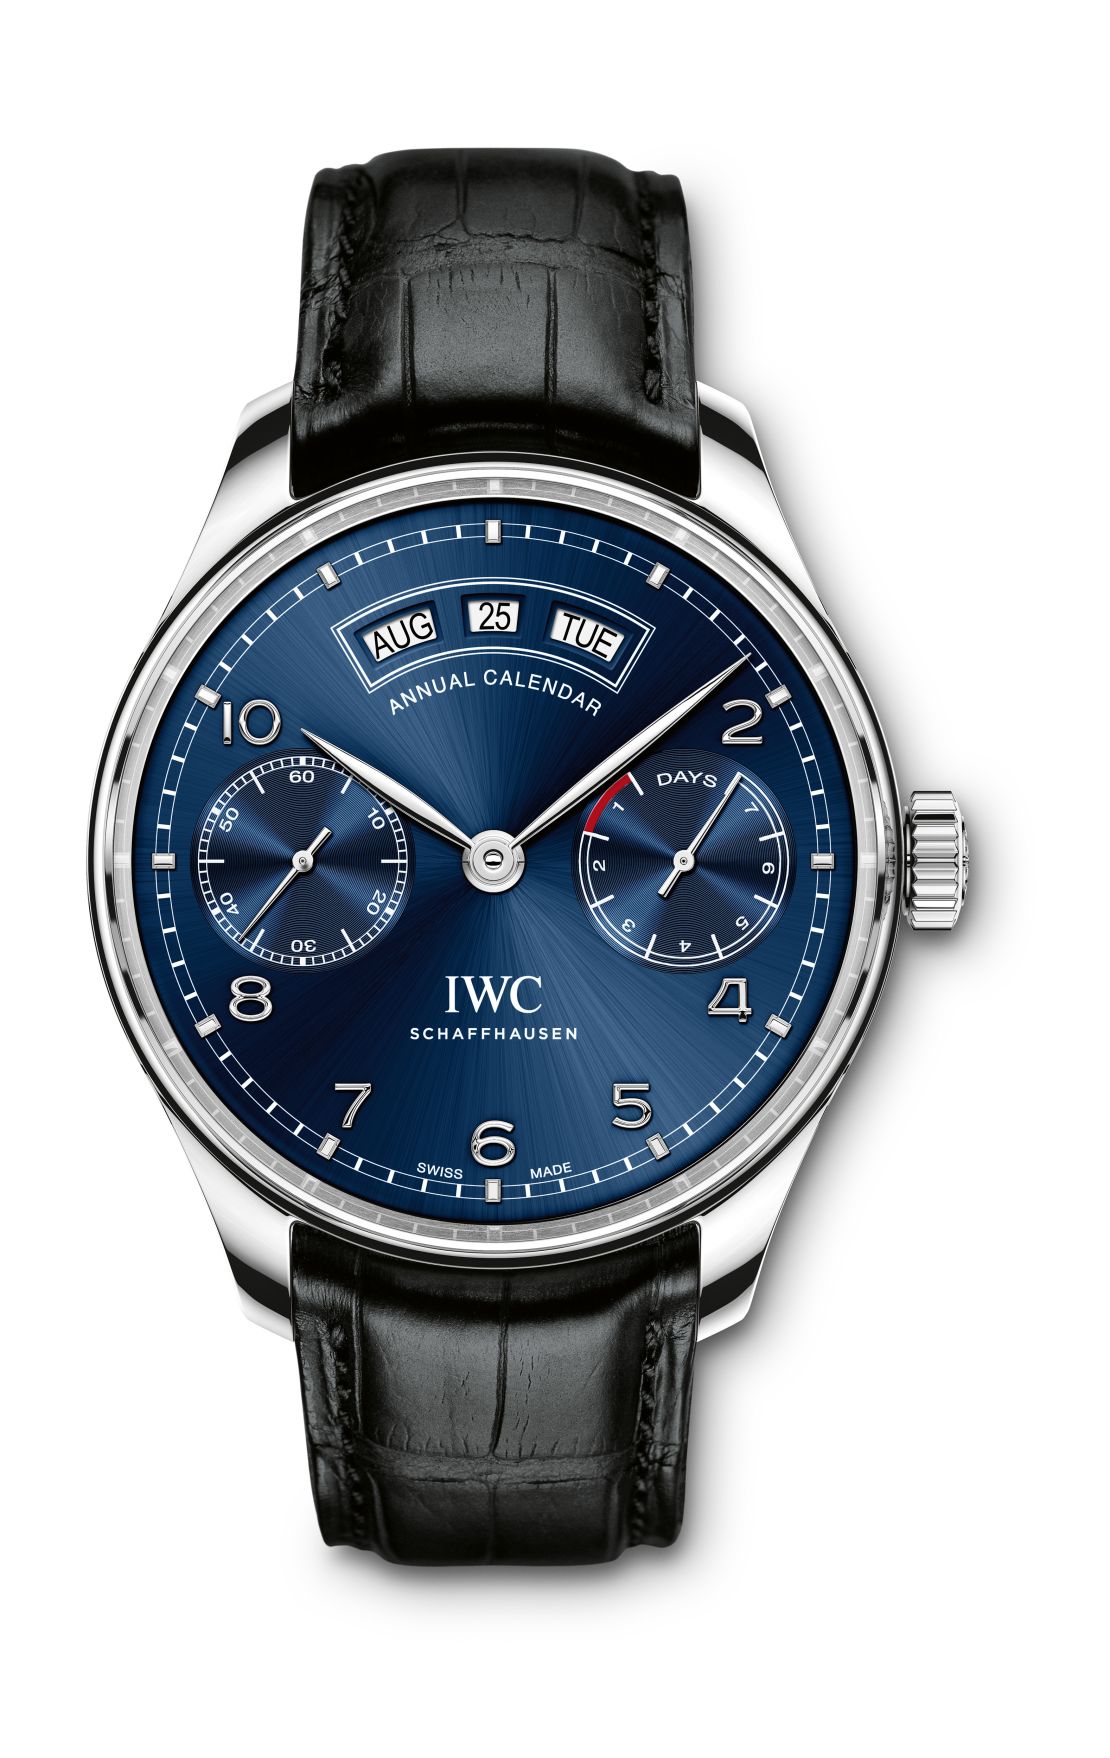 The newly developed Portugieser Annual Calendar closes the gap between the perpetual calendar and the simple date display.